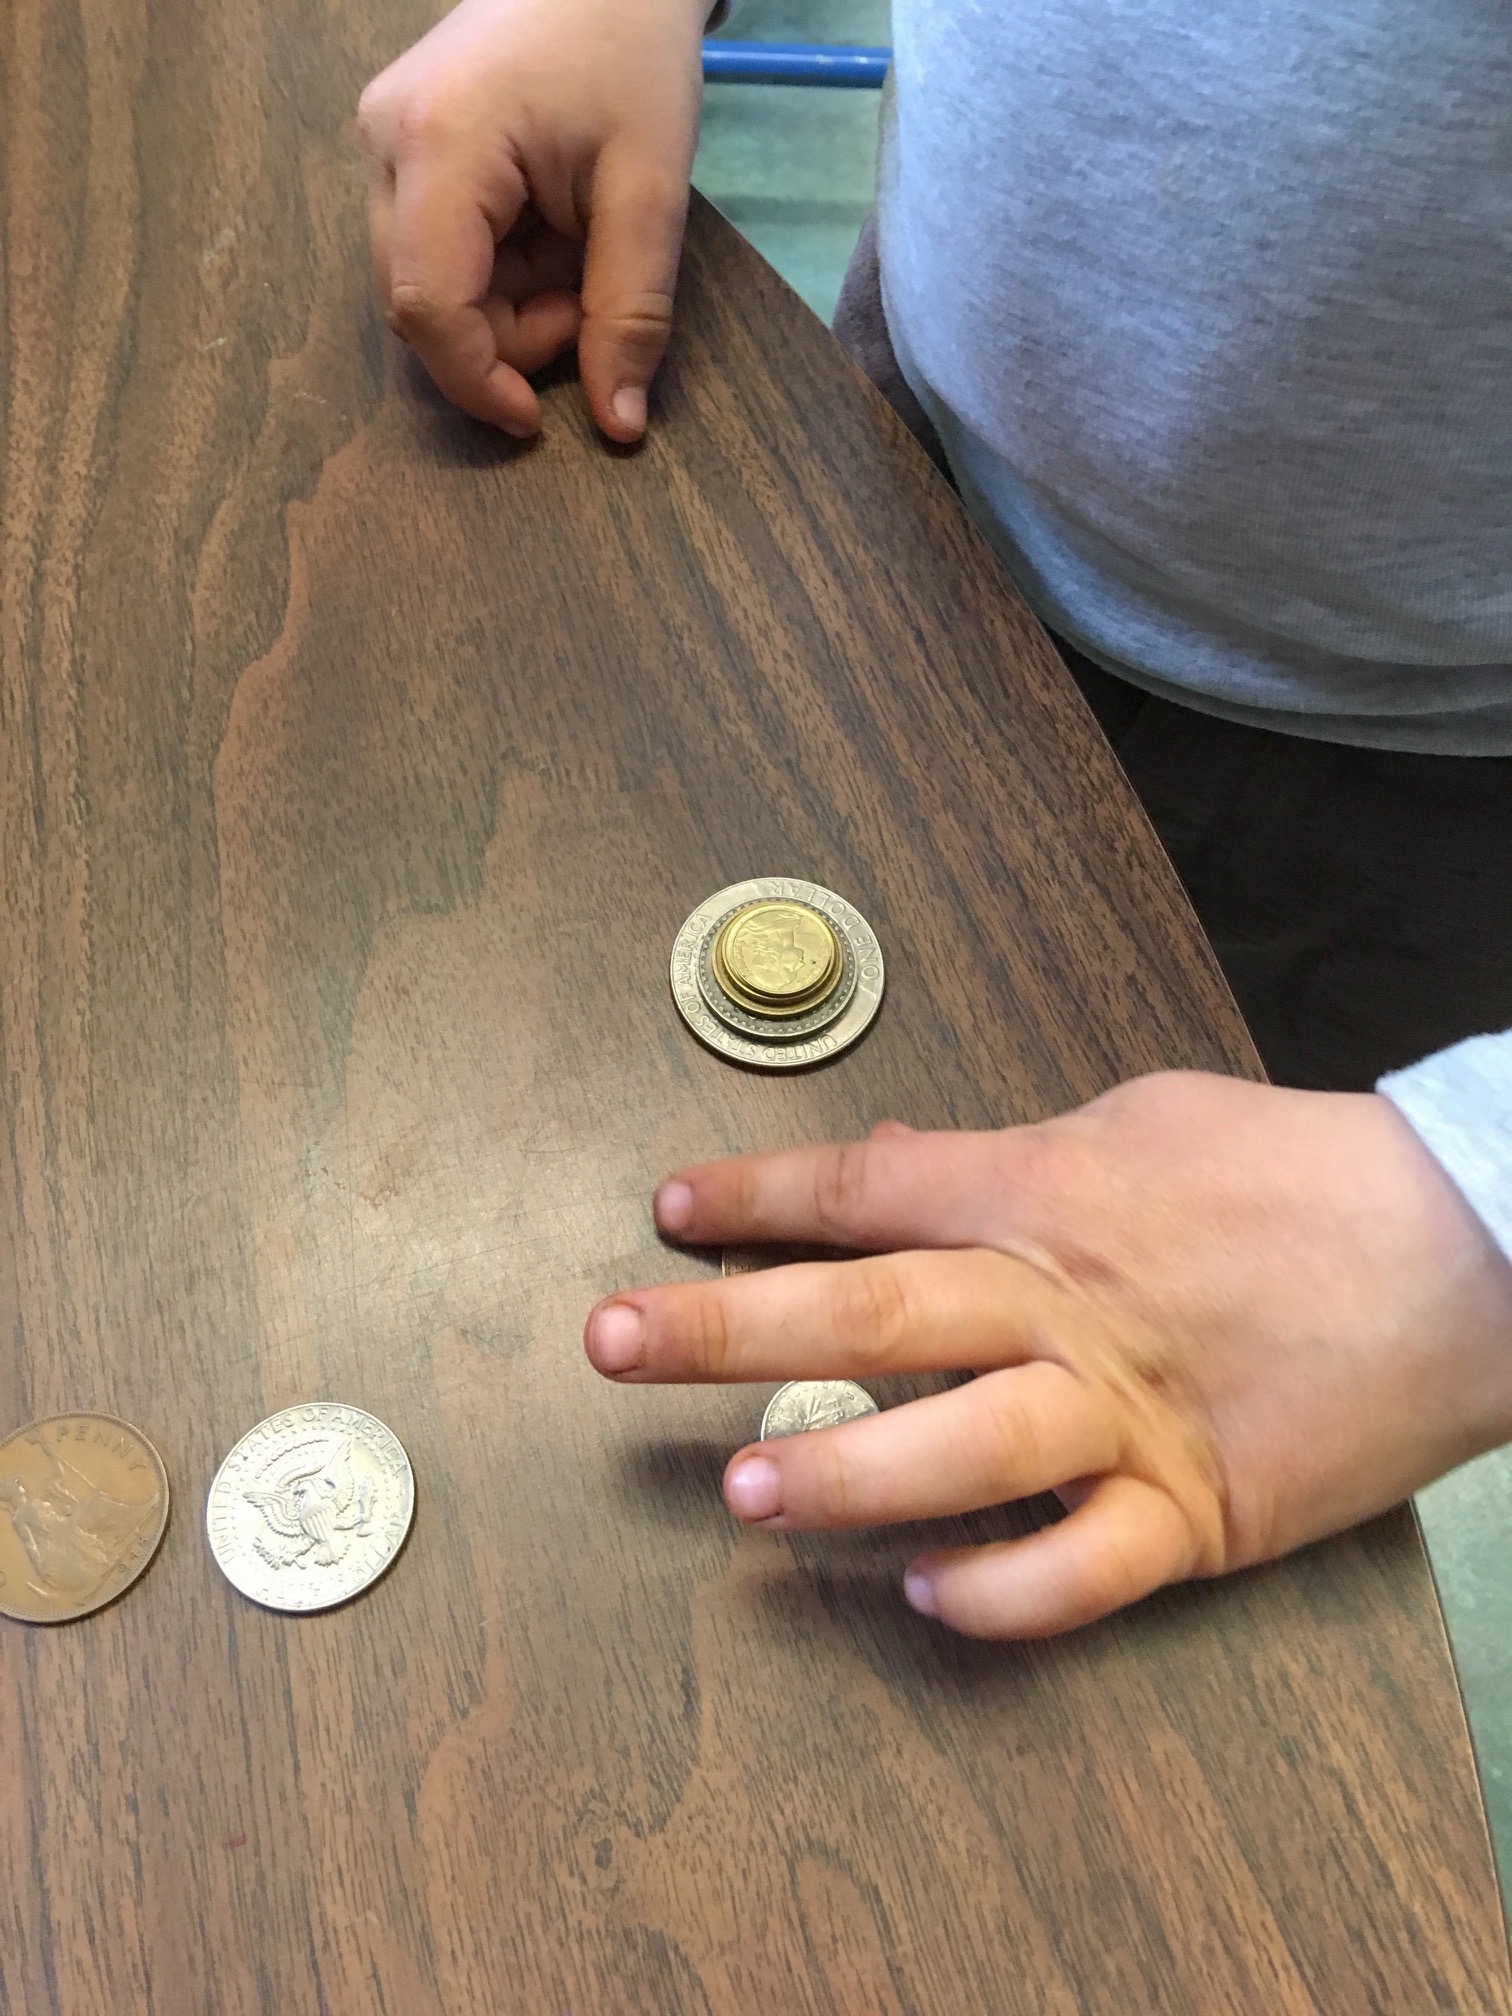 Coin Game Ingridscience ca